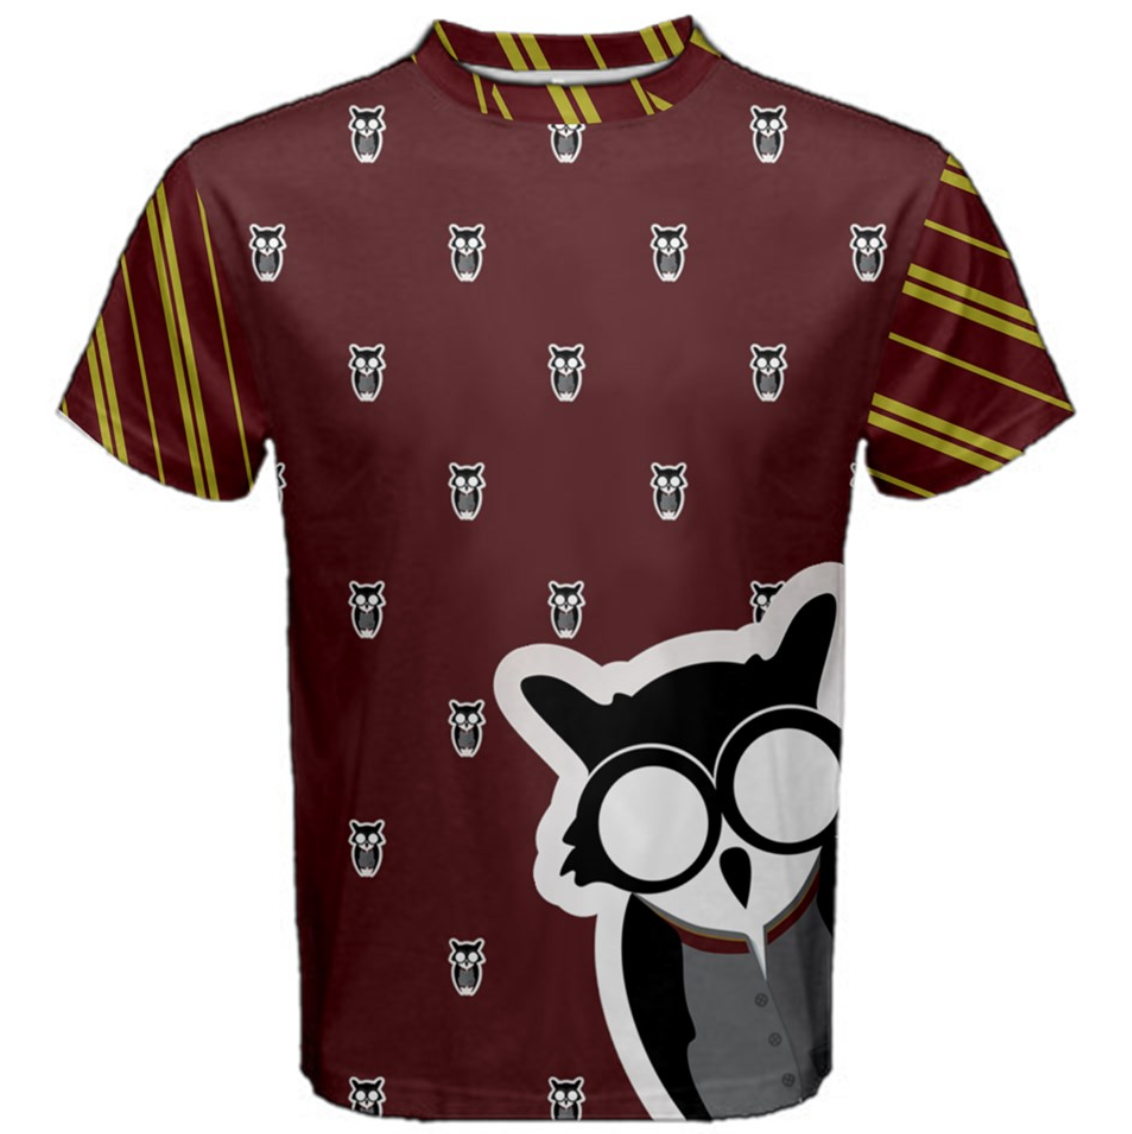 Owl Patterned (Unisex) Cotton Tee - Inspired by Gryffindor House